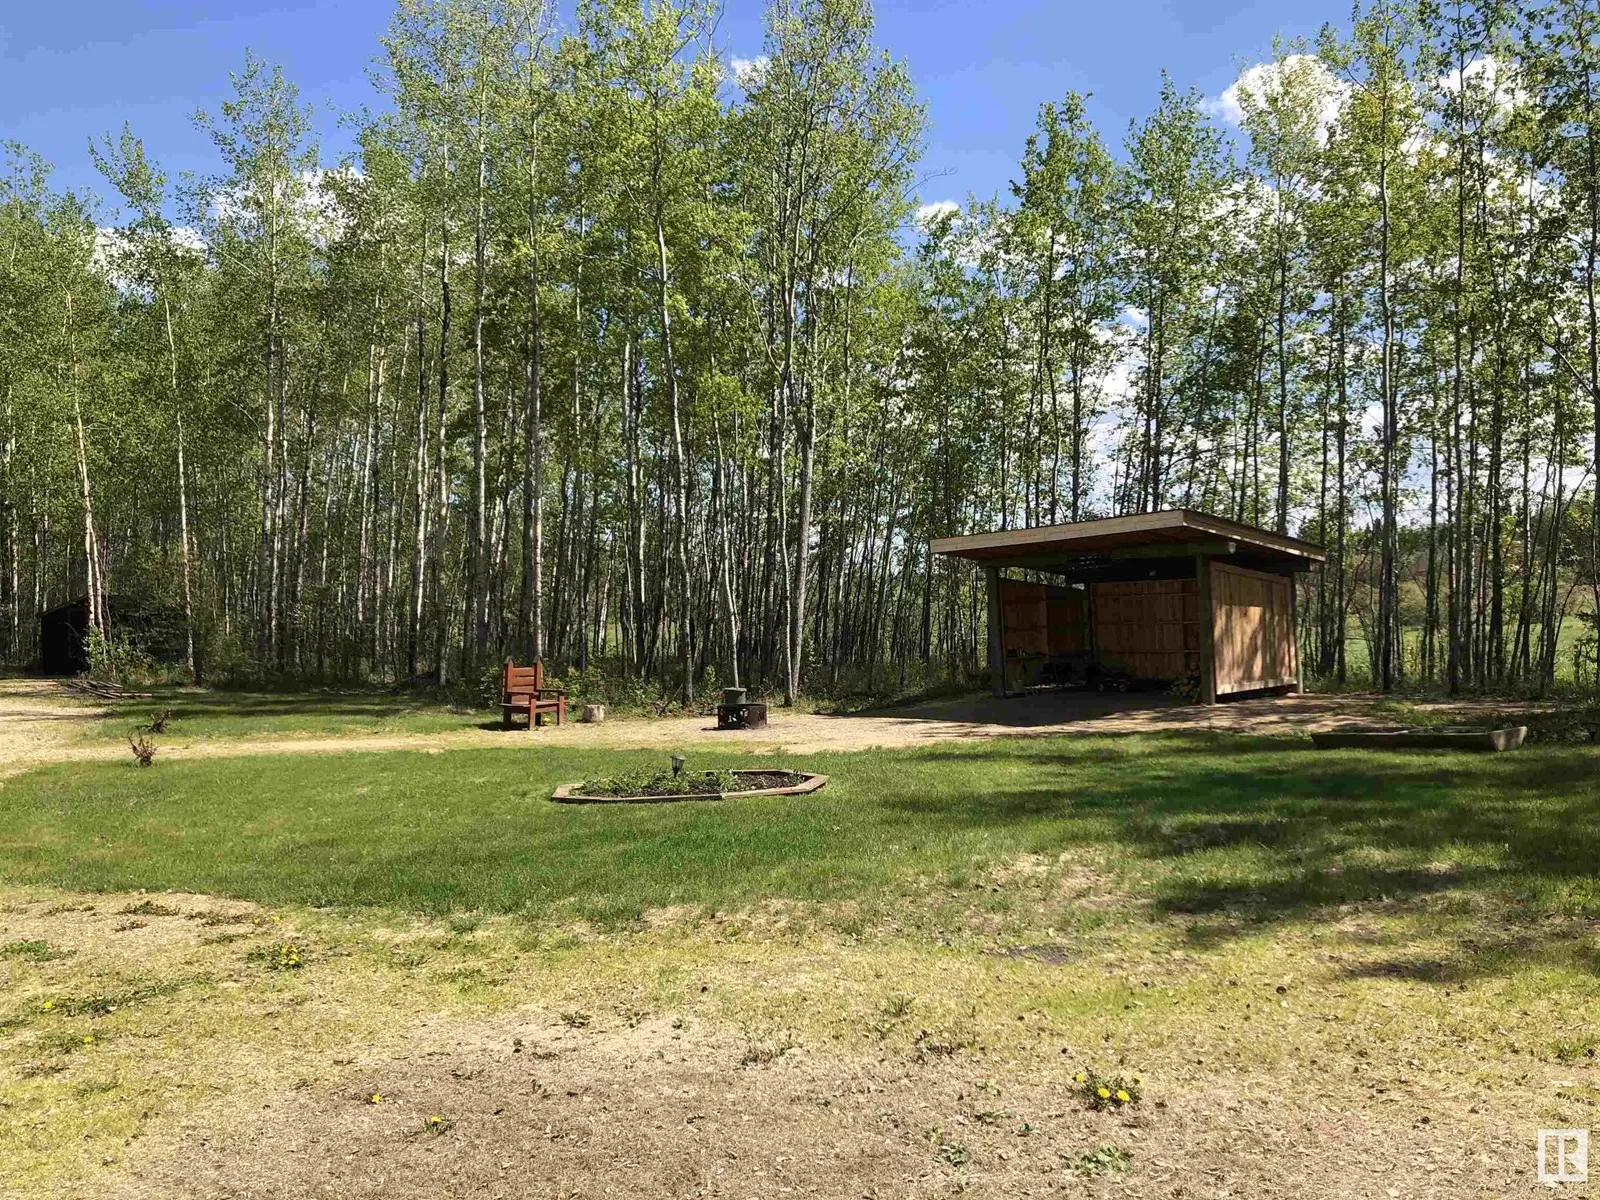 No Building for rent: #19 183049 Hwy 663, Rural Athabasca County, Alberta T0A 0M0